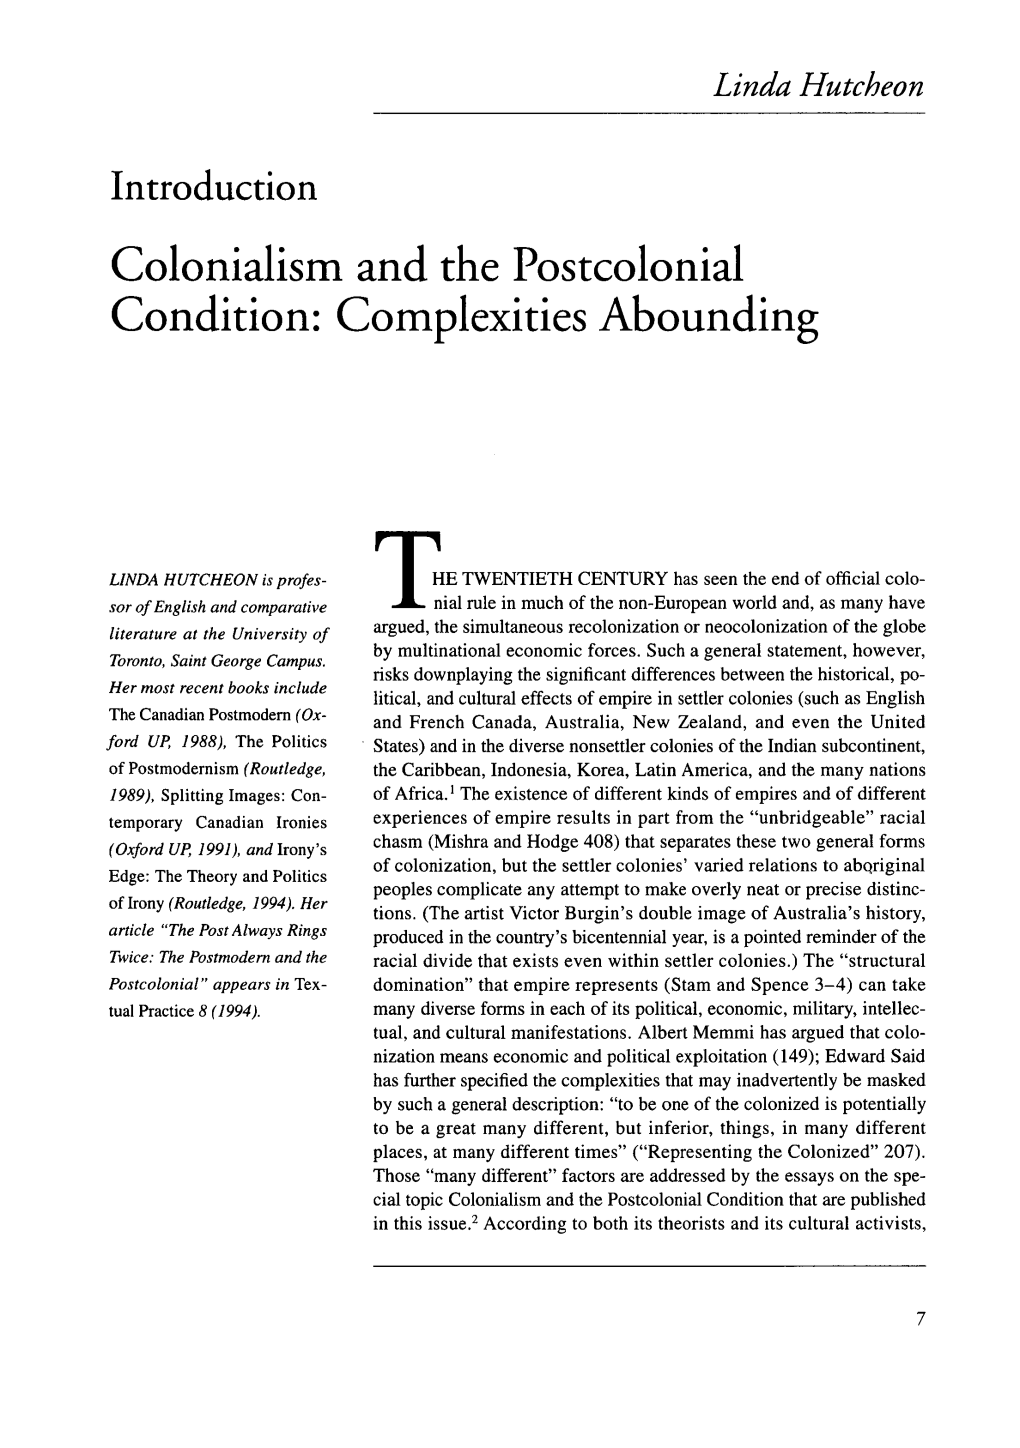 Colonialism and the Postcolonial Condition: Complexities Abounding